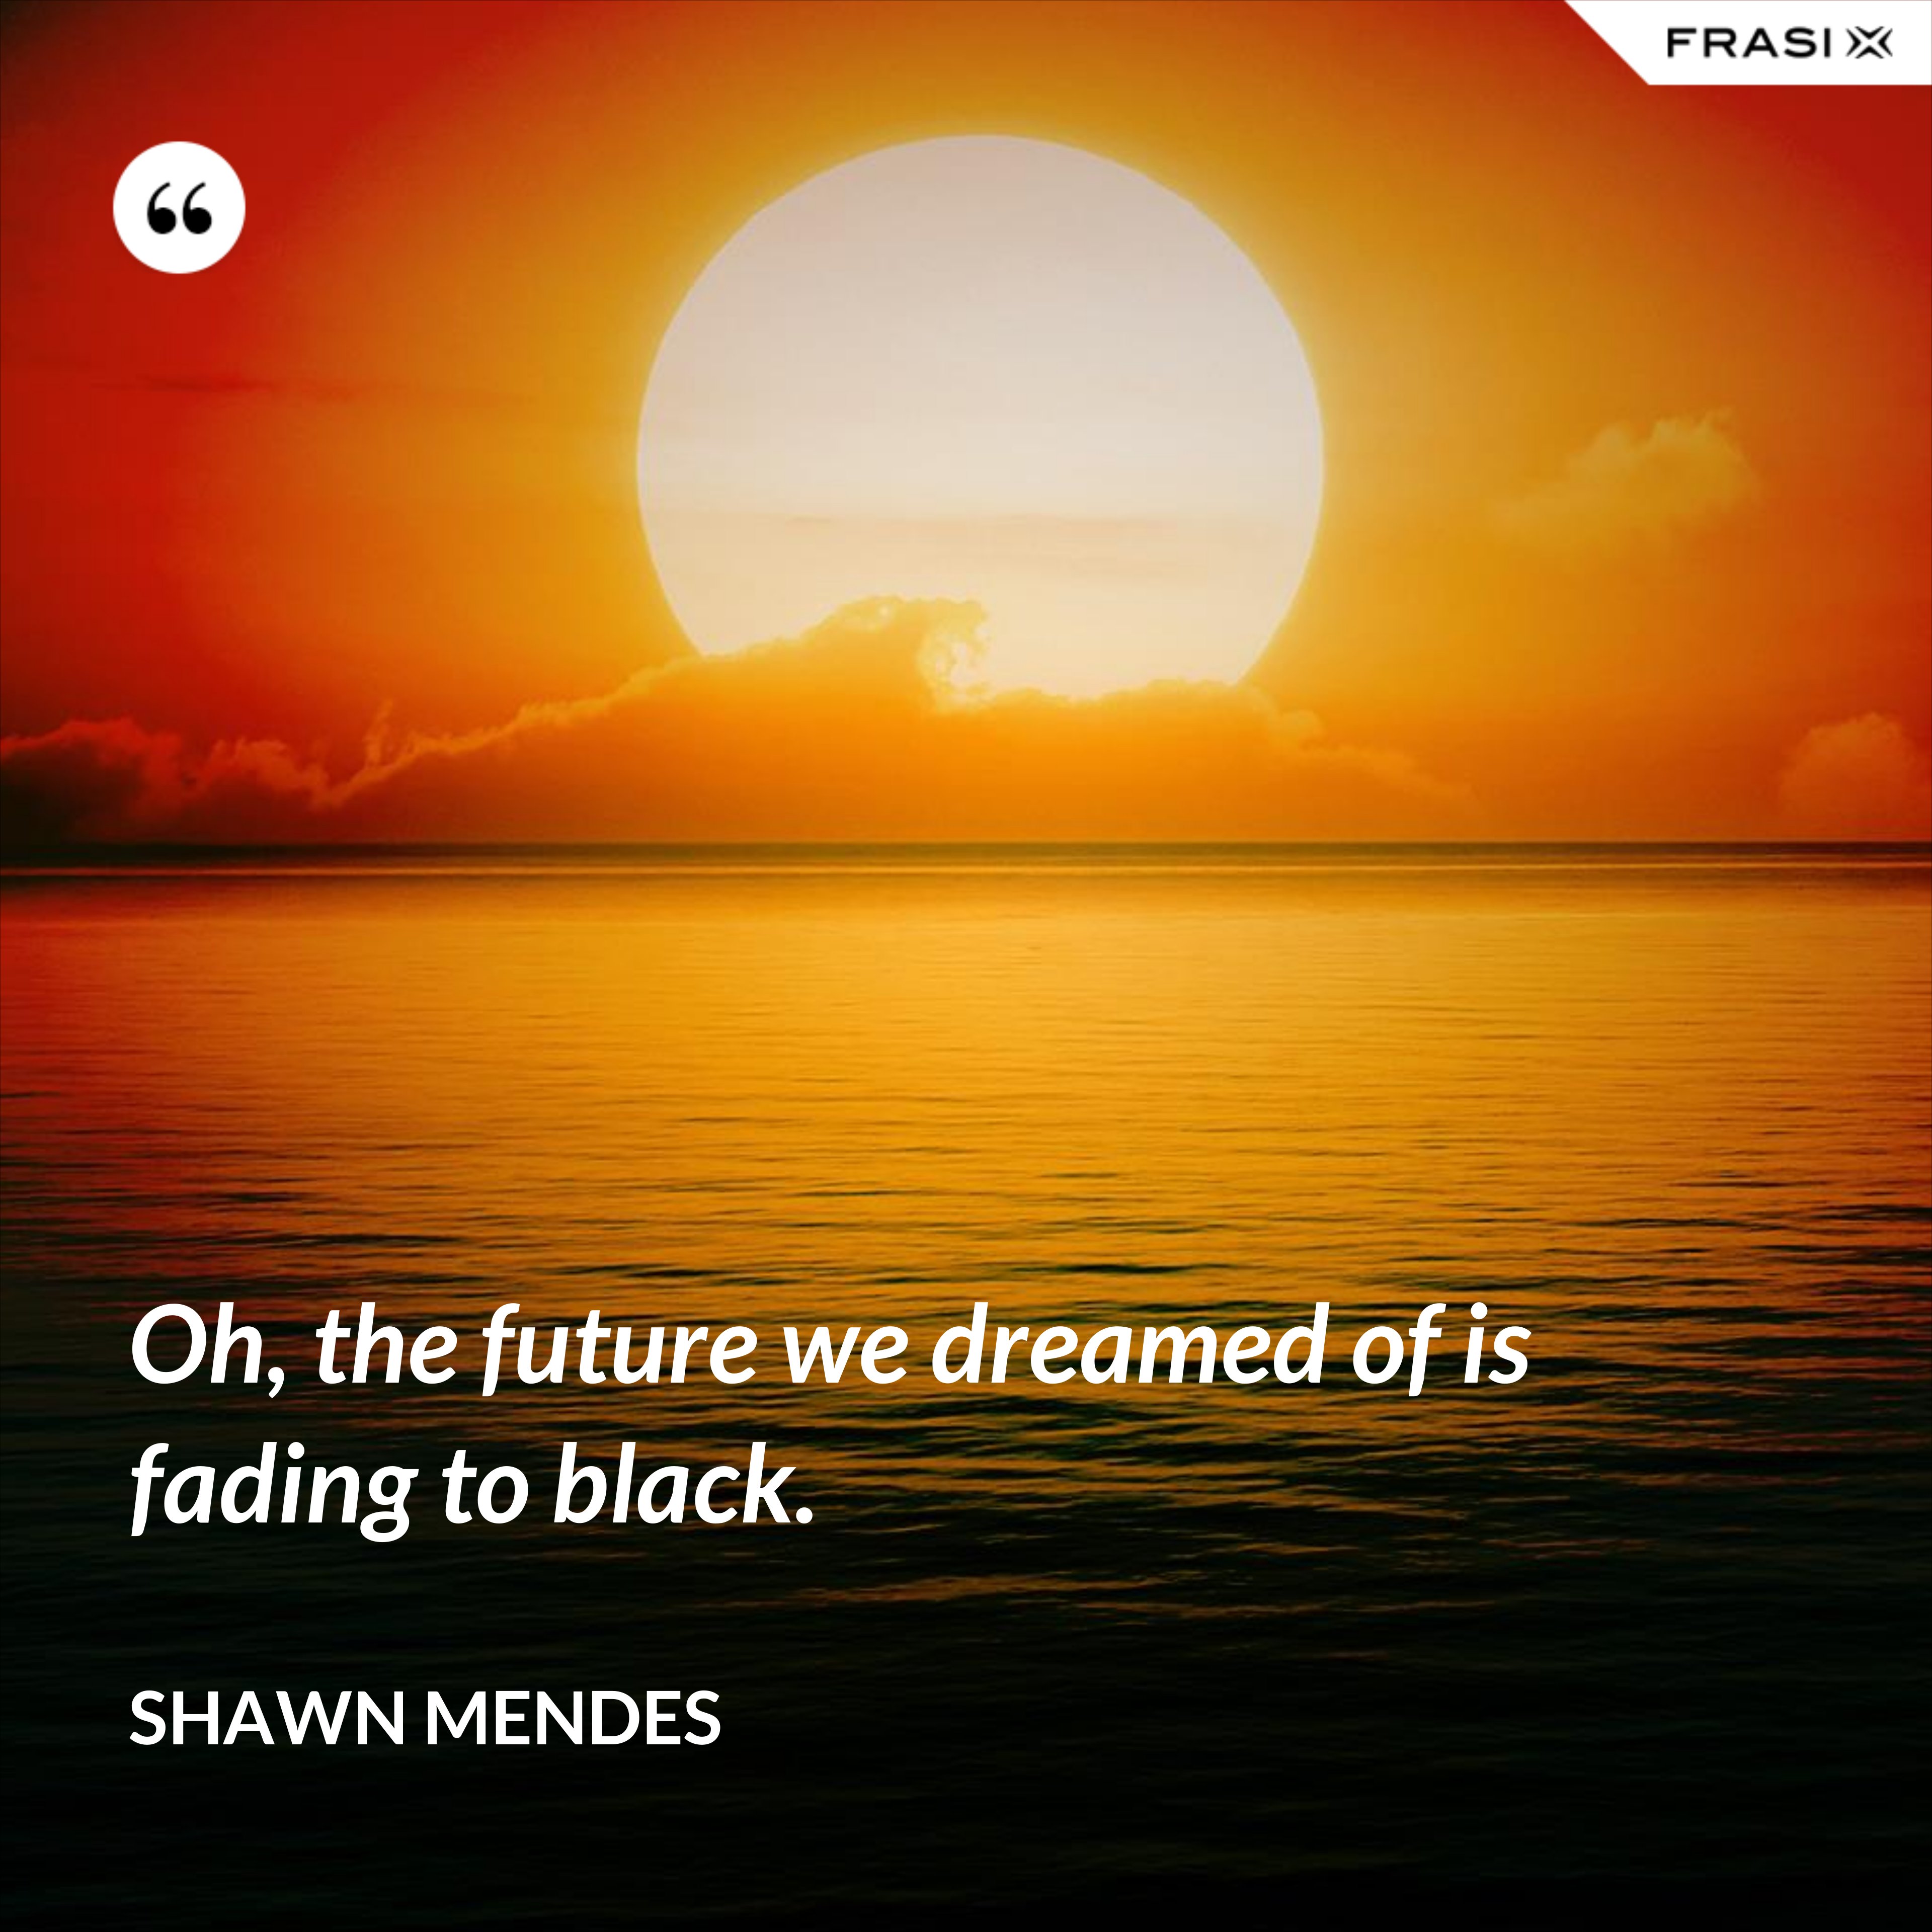 Oh, the future we dreamed of is fading to black. - Shawn Mendes